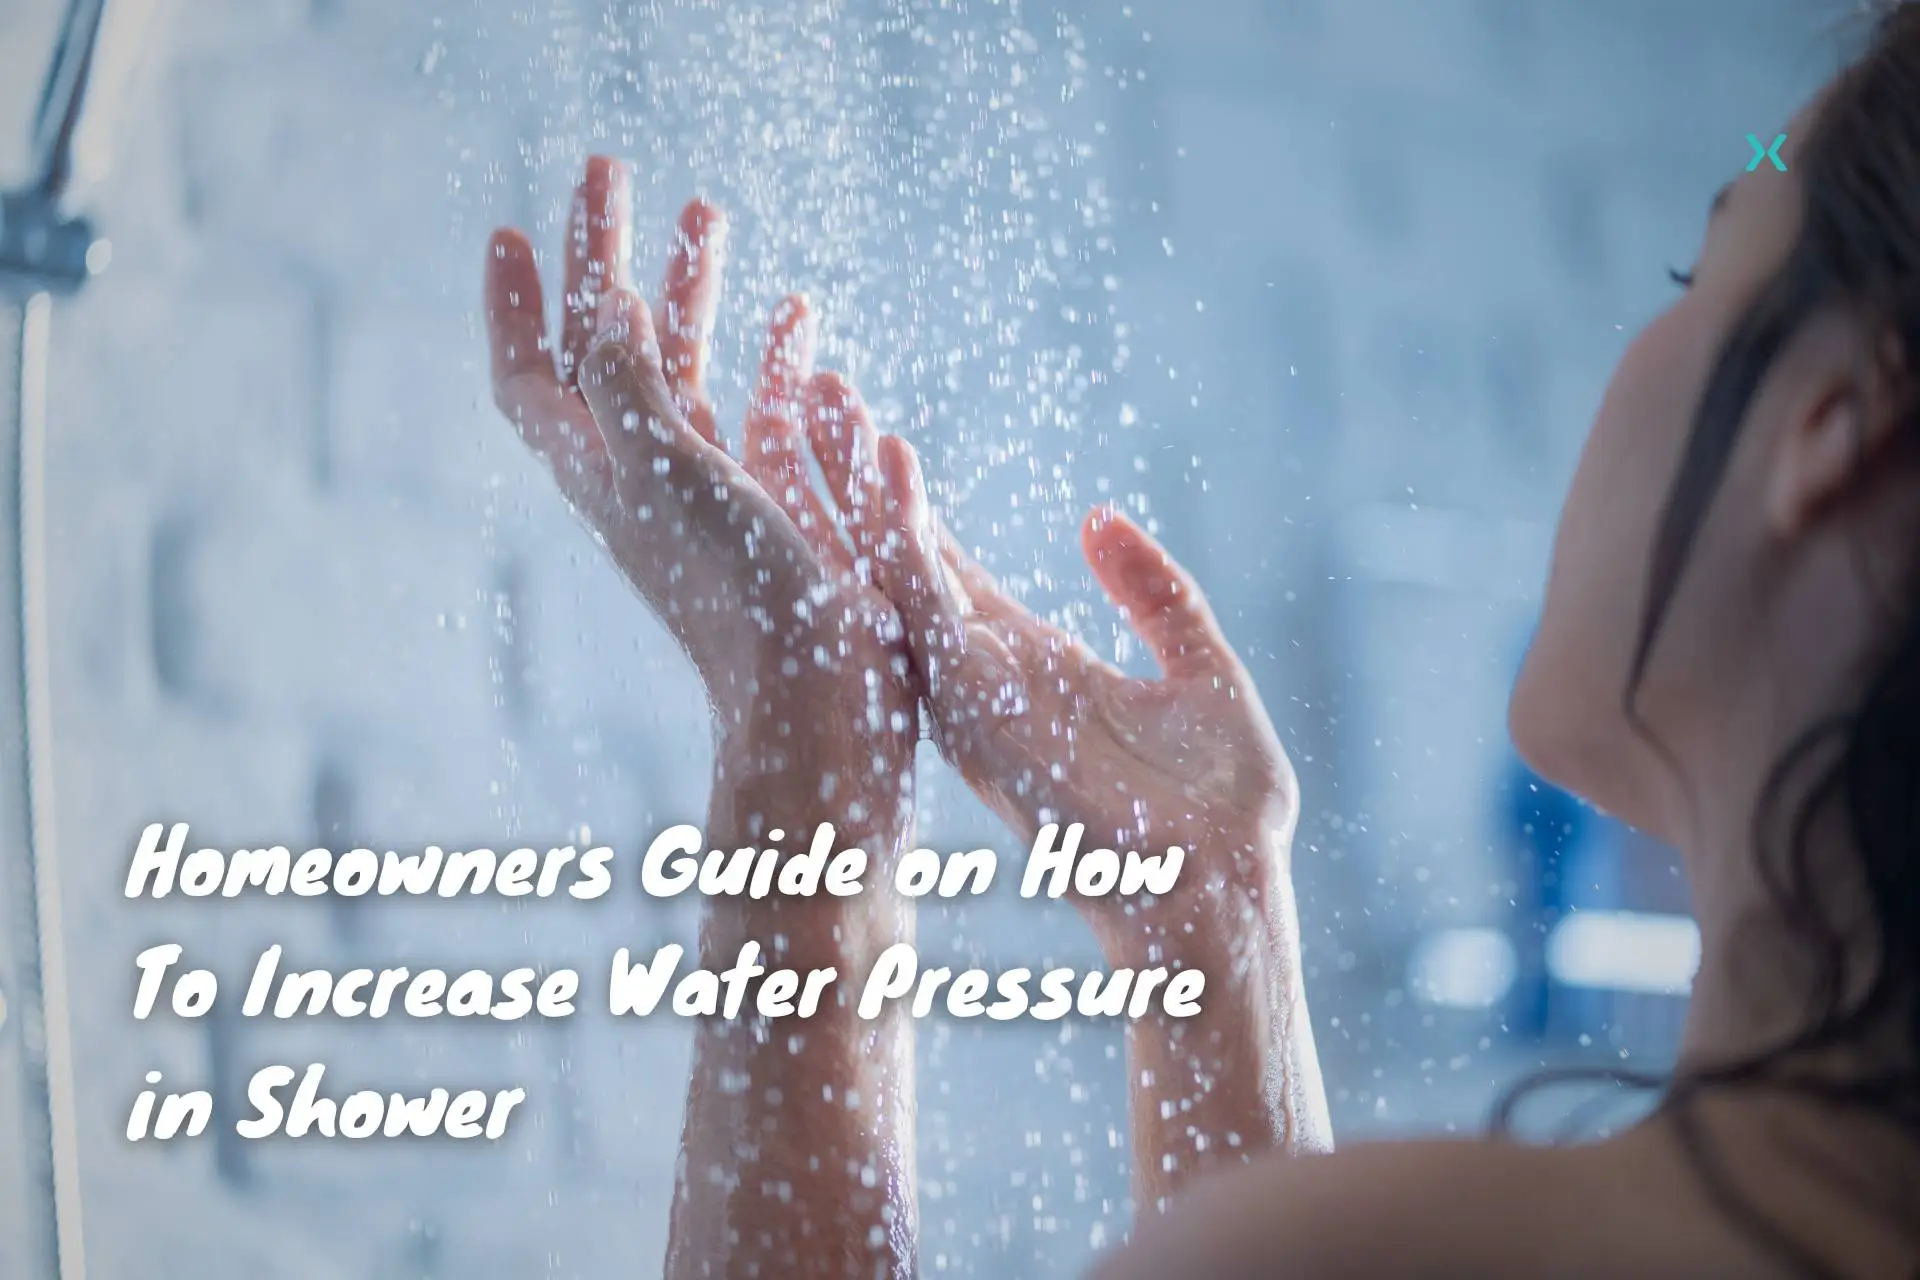 Homeowners Guide on How To Increase Water Pressure in Shower